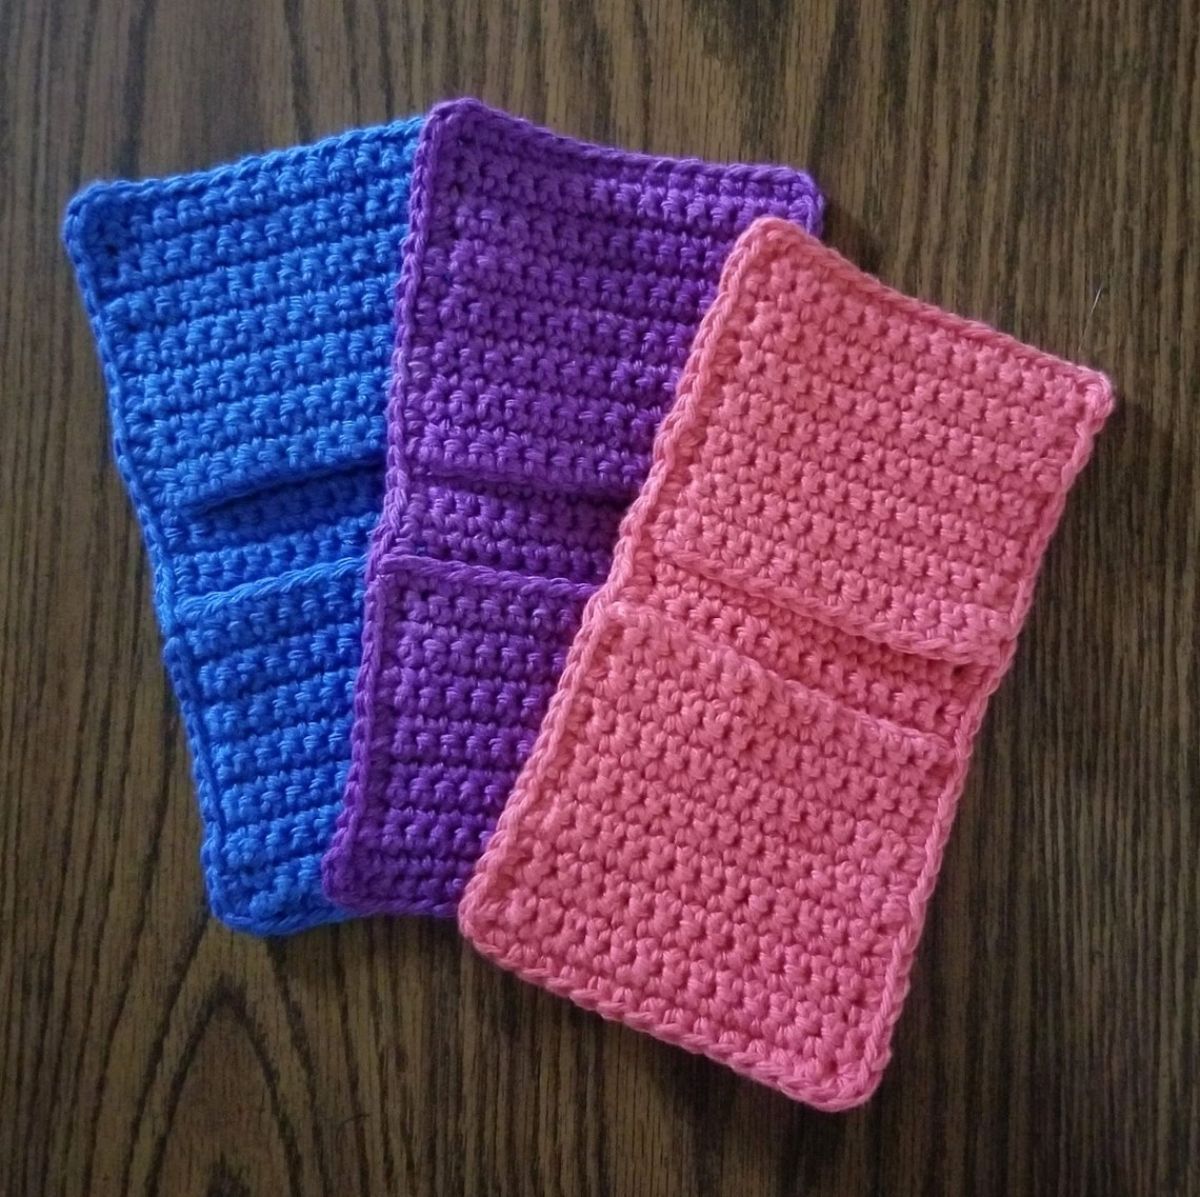 Rectangular potholders in pink, purple, and blue fanned out next to each other on a dark wooden table.